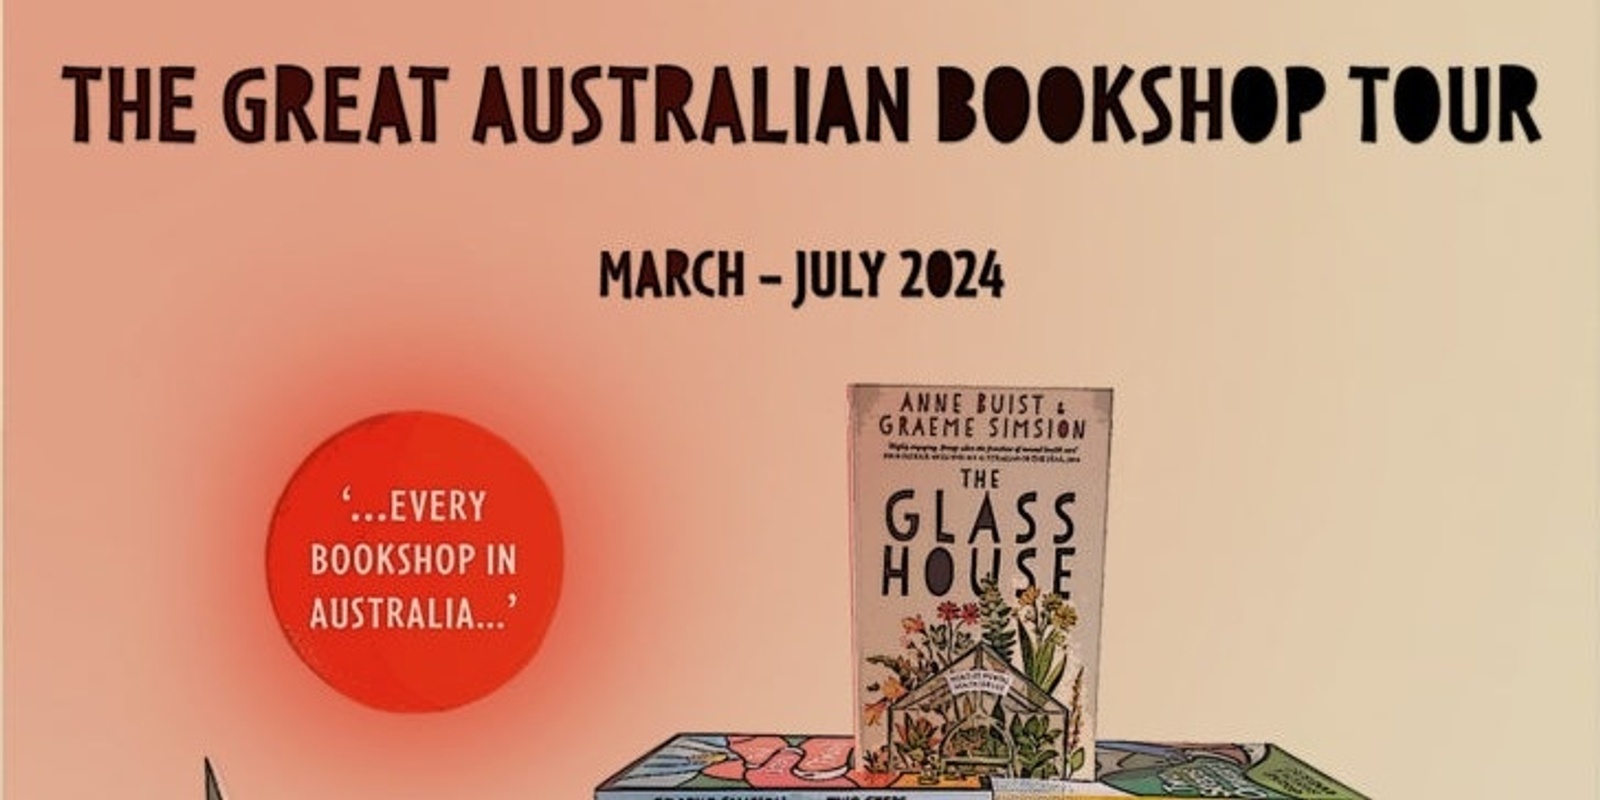 Banner image for The Great Australian Bookshop Tour with Graeme Simsion and Anne Buist at Red Door Books Lancefield